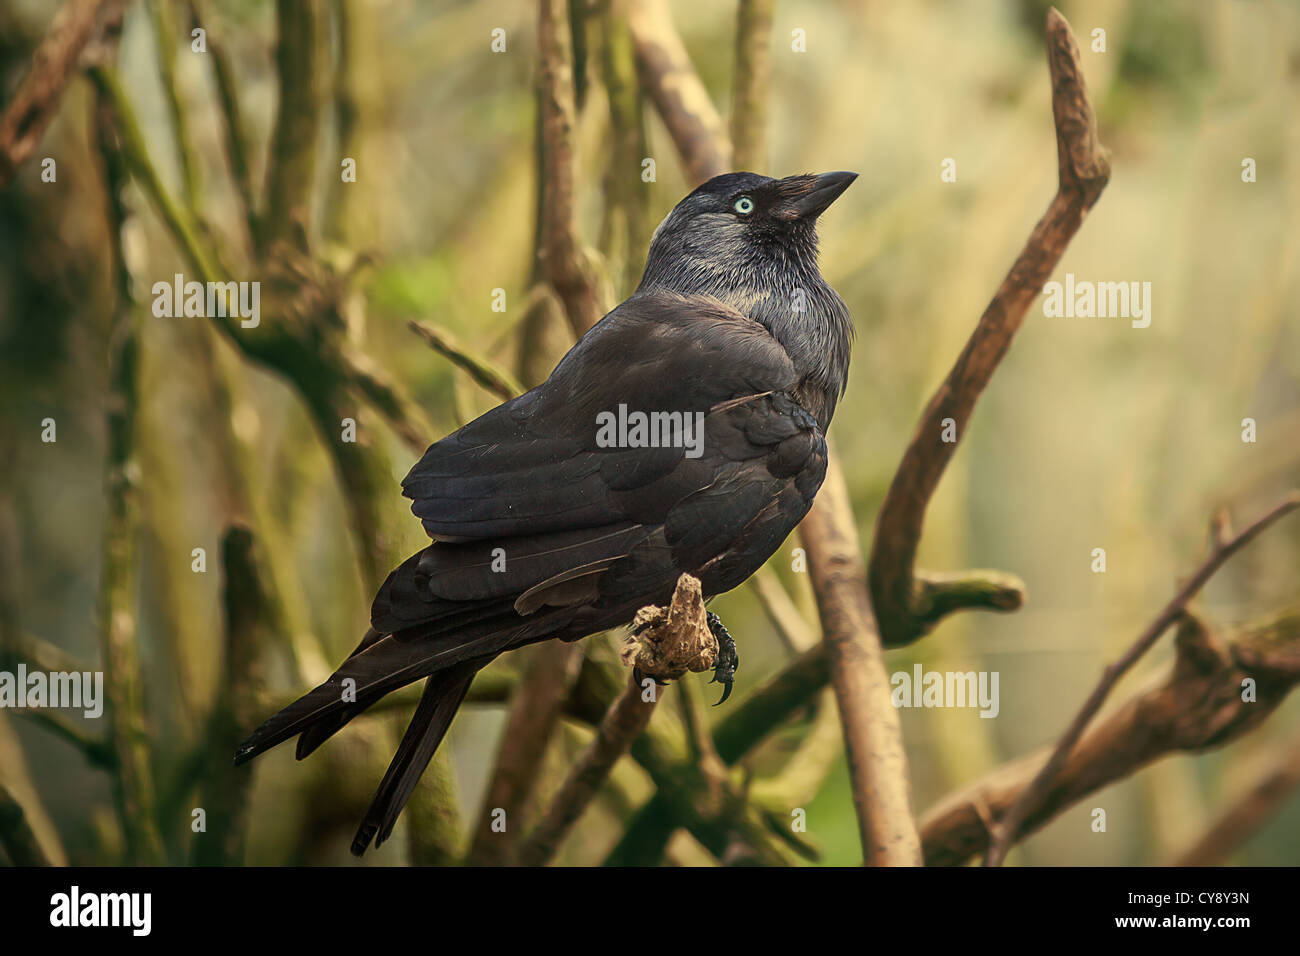 Rook perched on tree branch Stock Photo